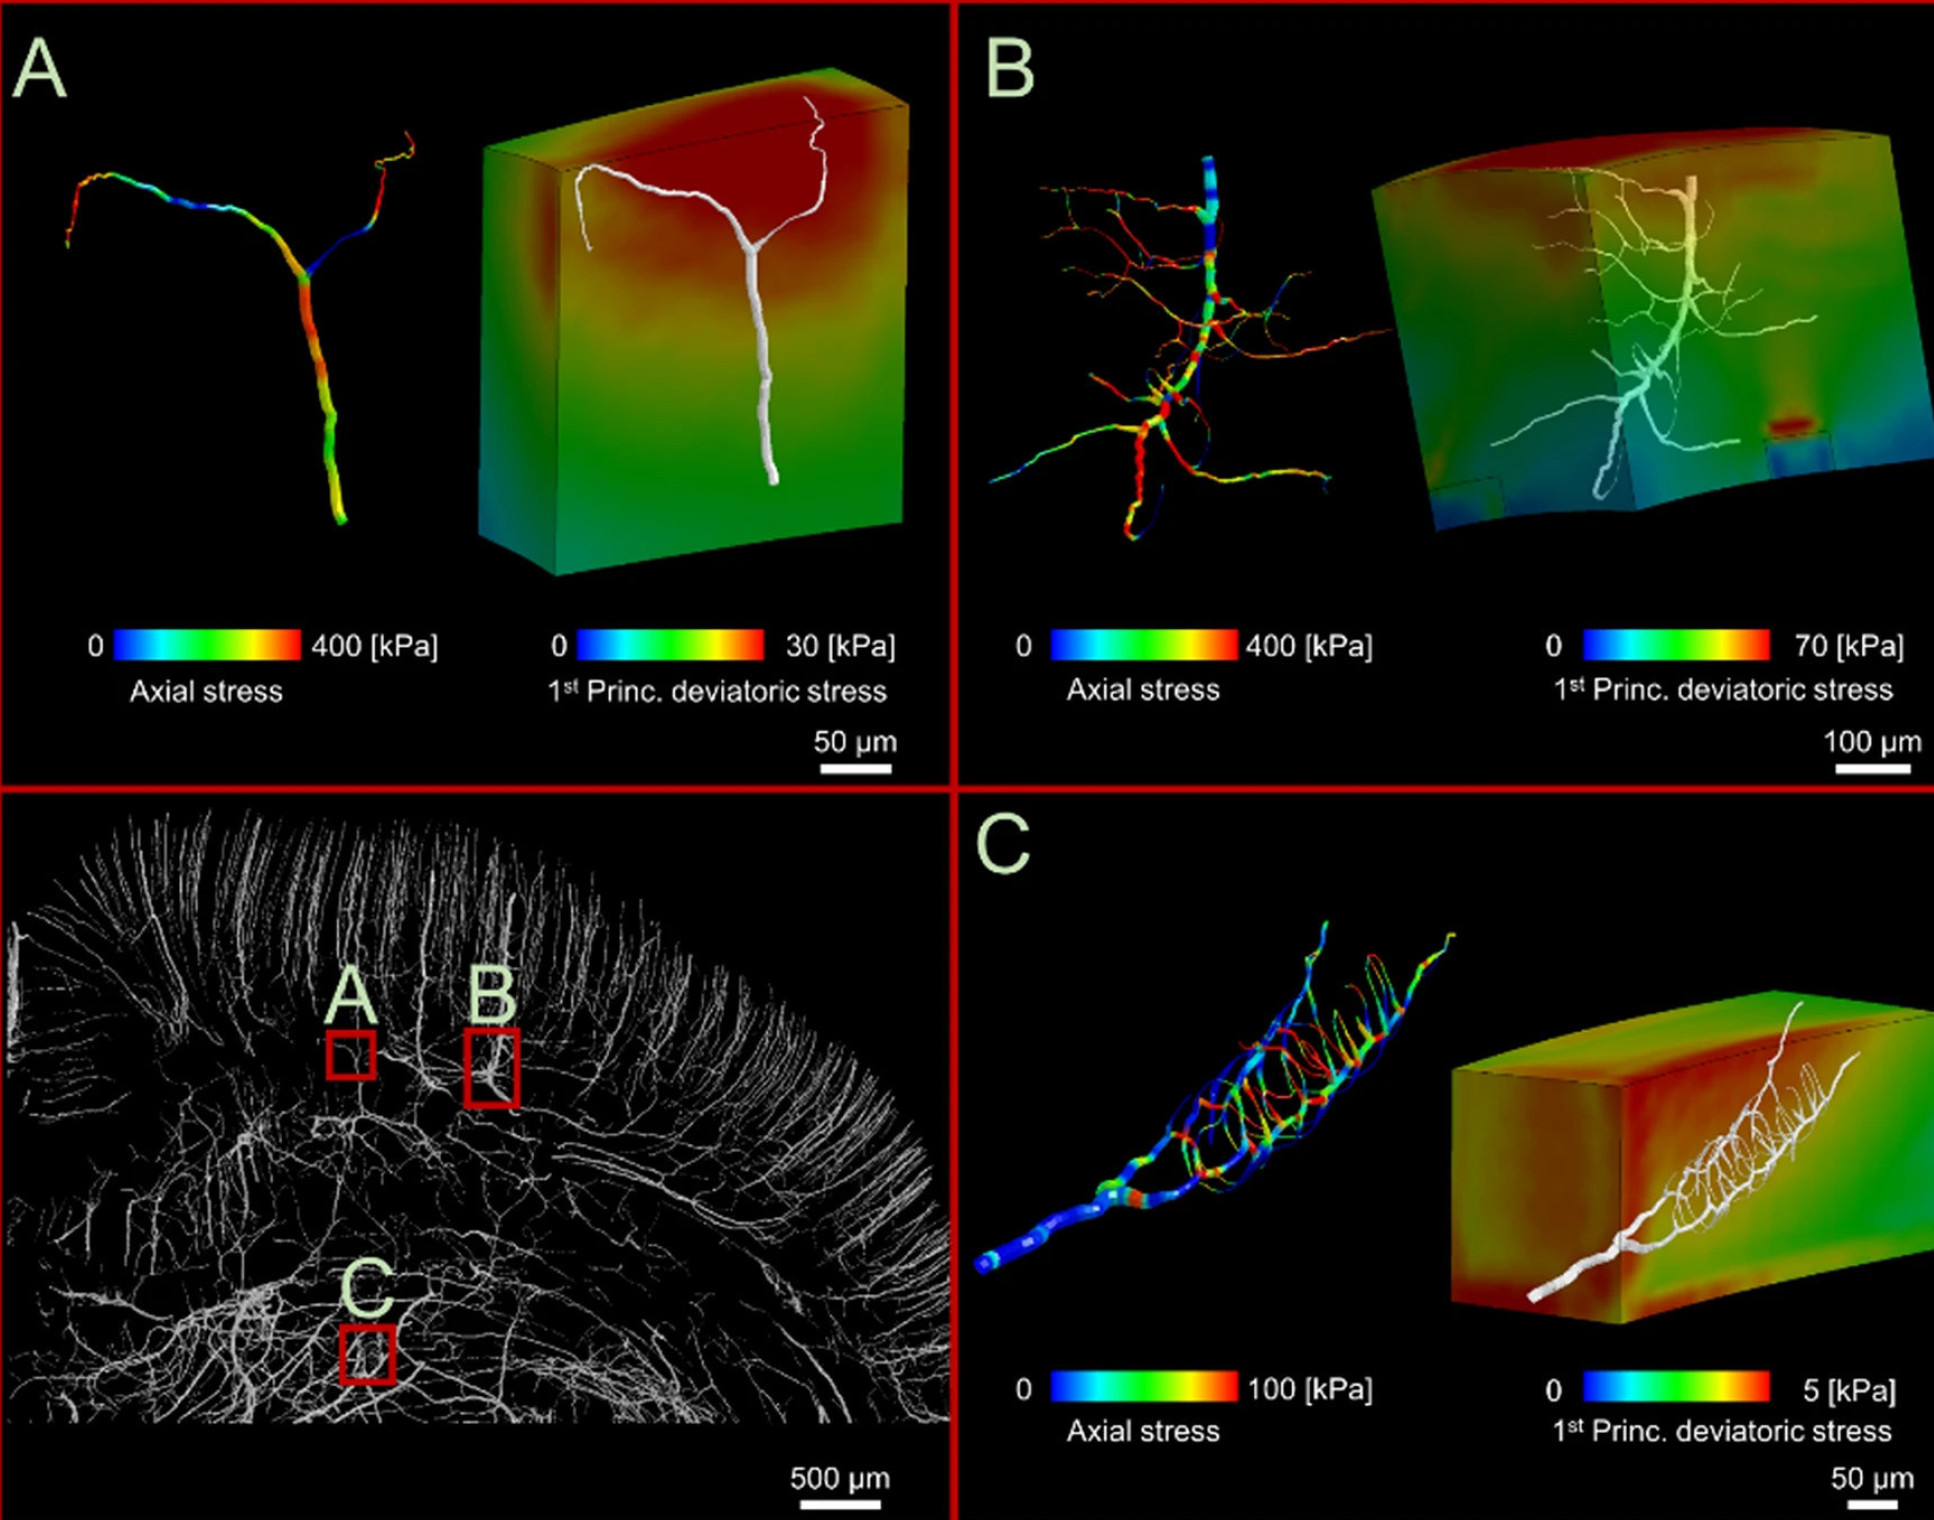 Very closeup images of blood vessels in the brain under stress